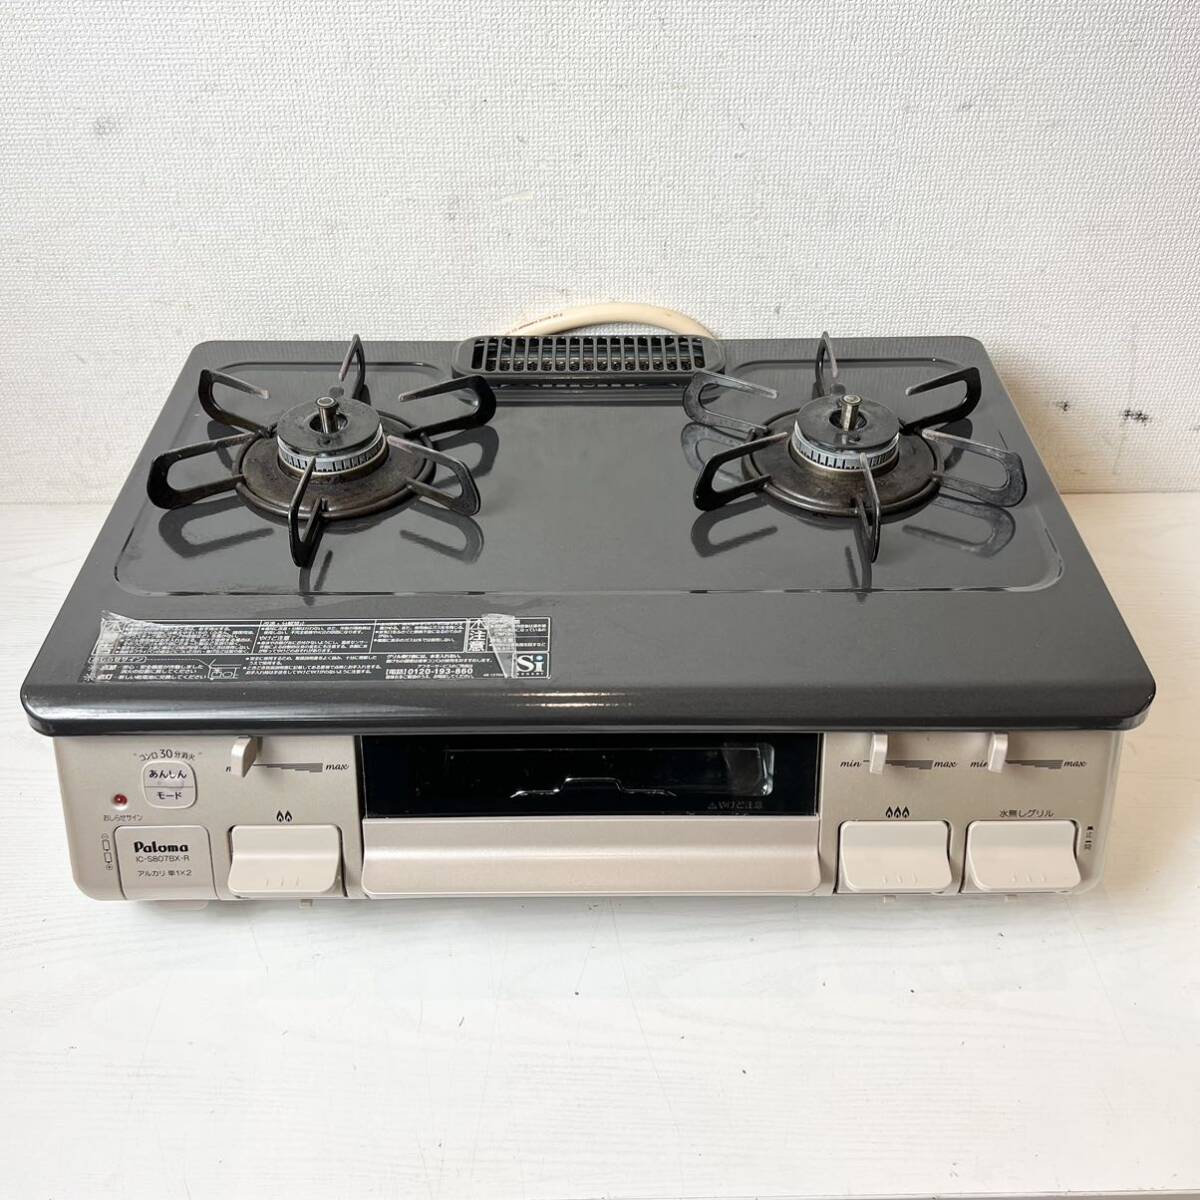 264* secondhand goods Palomaparoma2. gas portable cooking stove gas-stove city gas IC-S807BX-1R black 2020 year made operation verification ending *